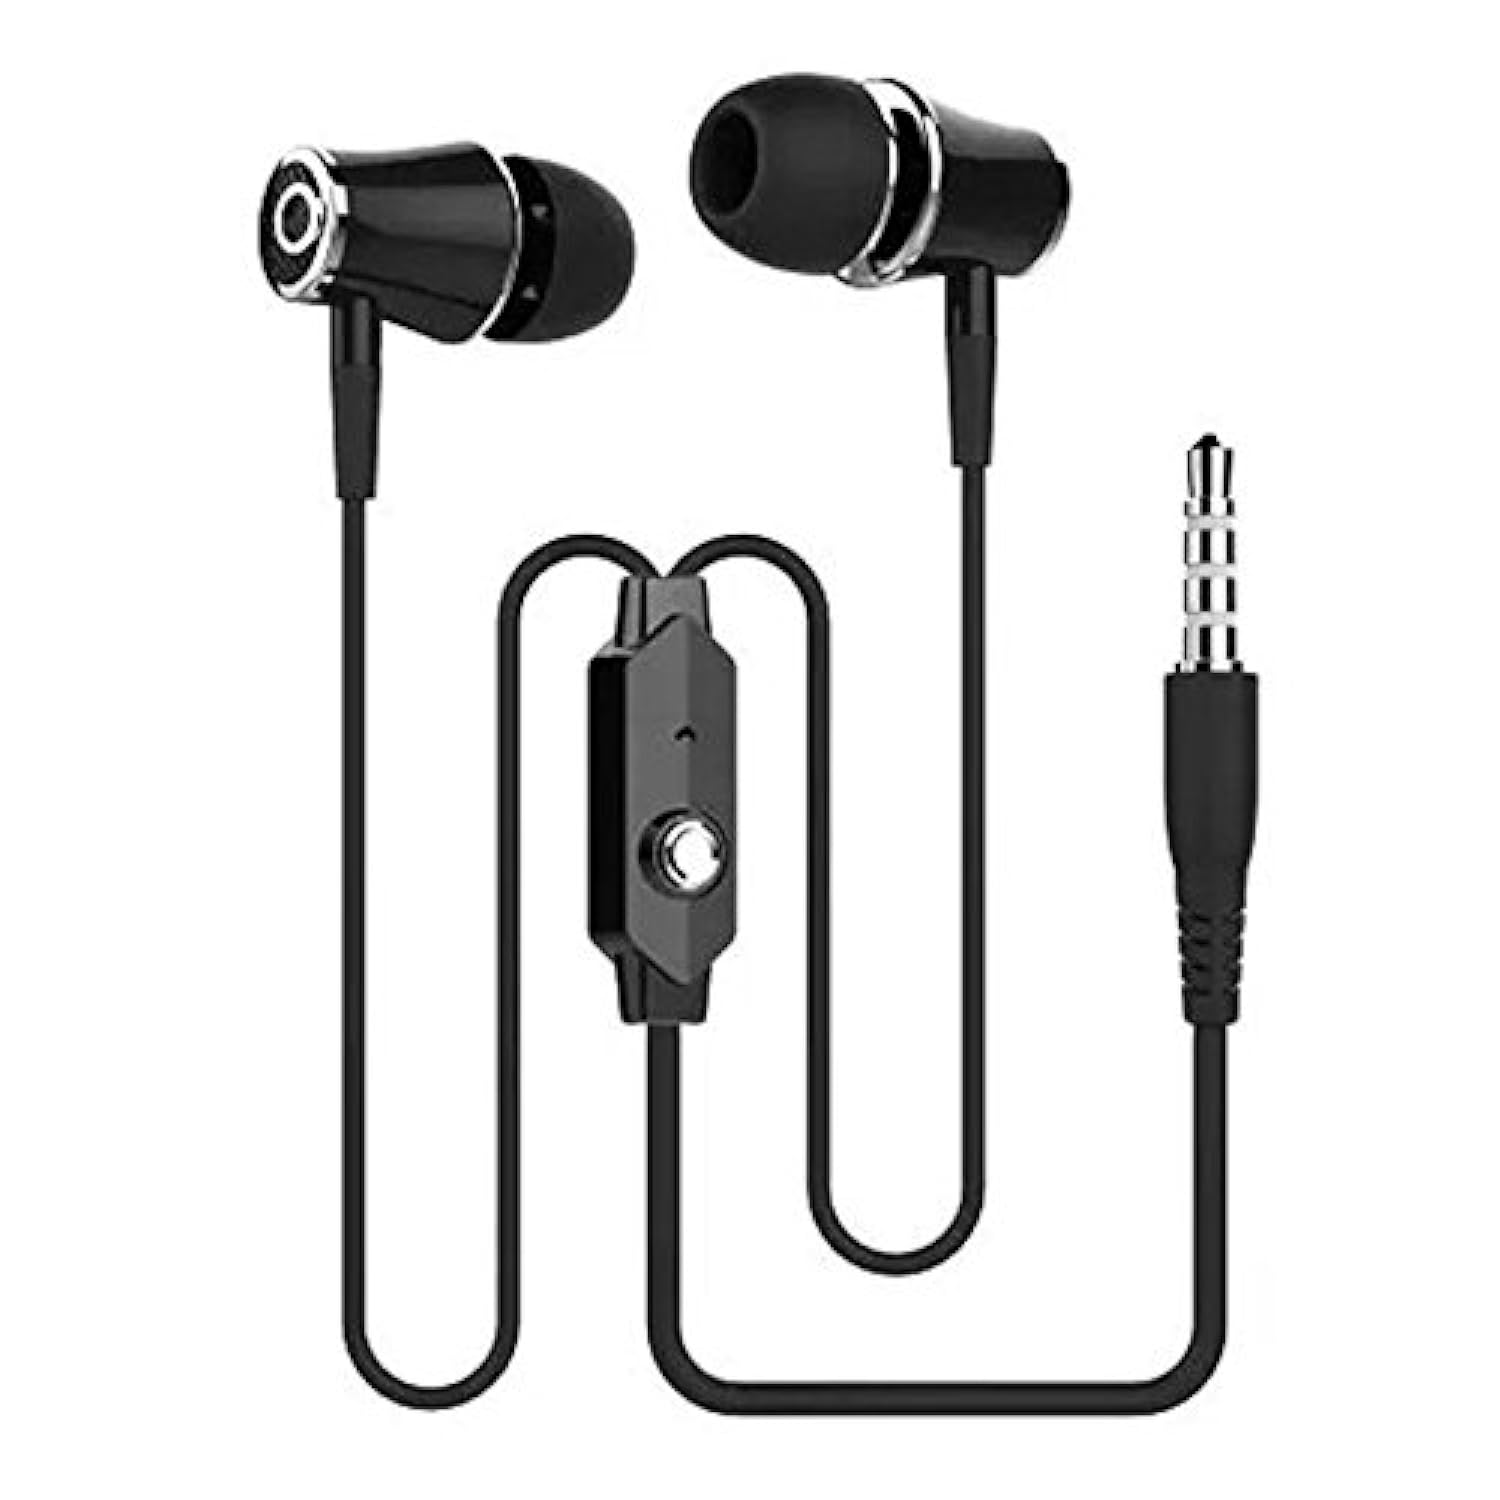 Great Choice Products Earphones Replacement For Kindle Fire Tablets, Kindle Paperwhite Ereaders, Compatible With For Samsung S7 S6 Edge Headph…